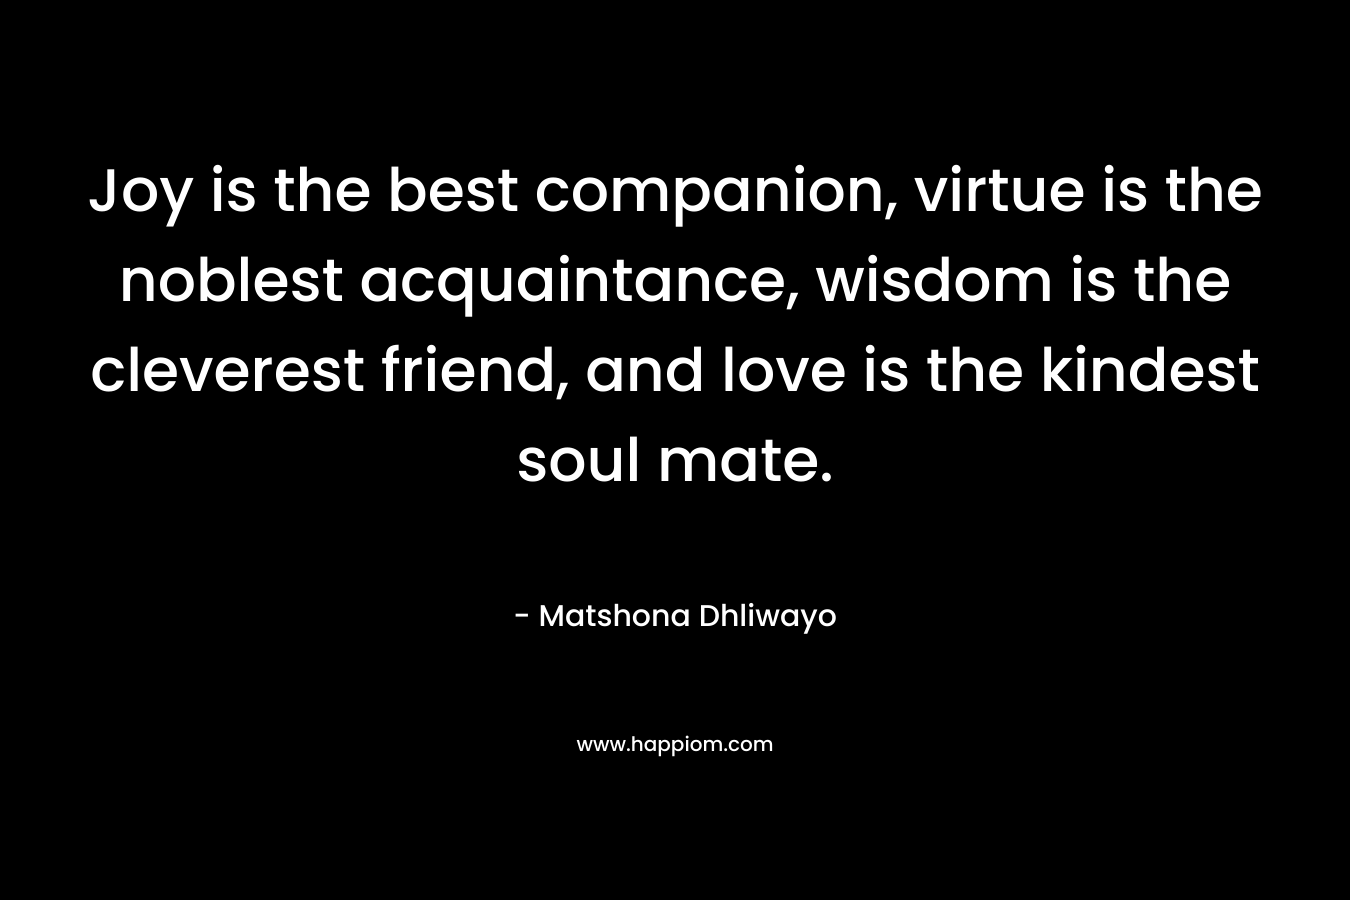 Joy is the best companion, virtue is the noblest acquaintance, wisdom is the cleverest friend, and love is the kindest soul mate. – Matshona Dhliwayo